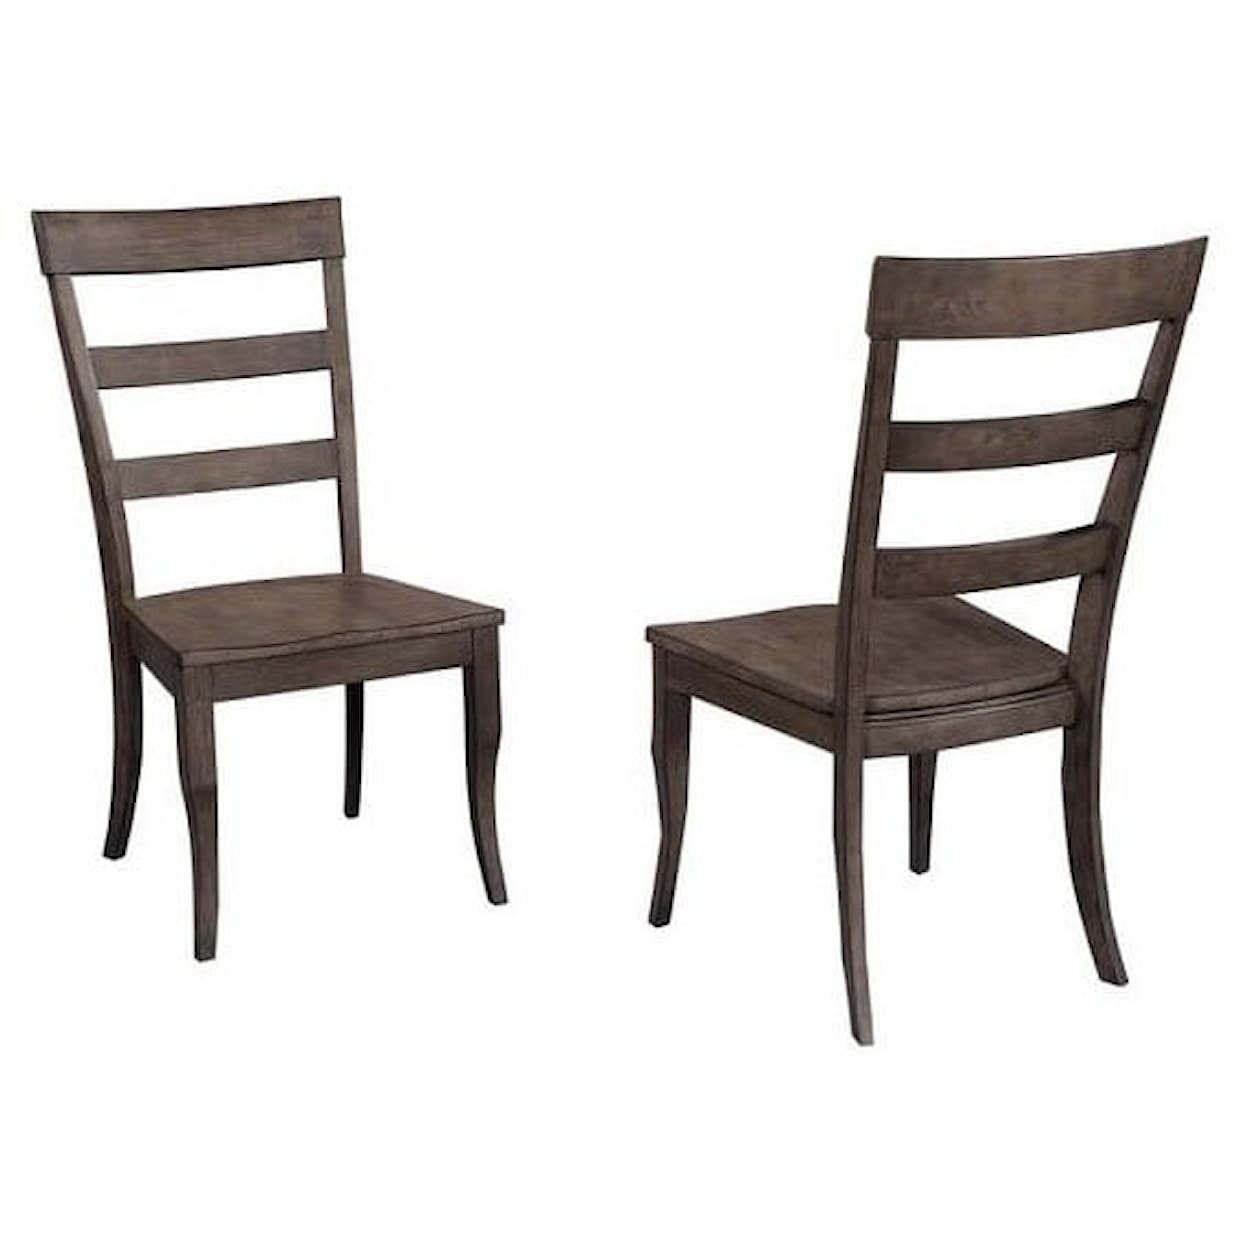 Aspenhome Bethany Bethany Dining Side Chair